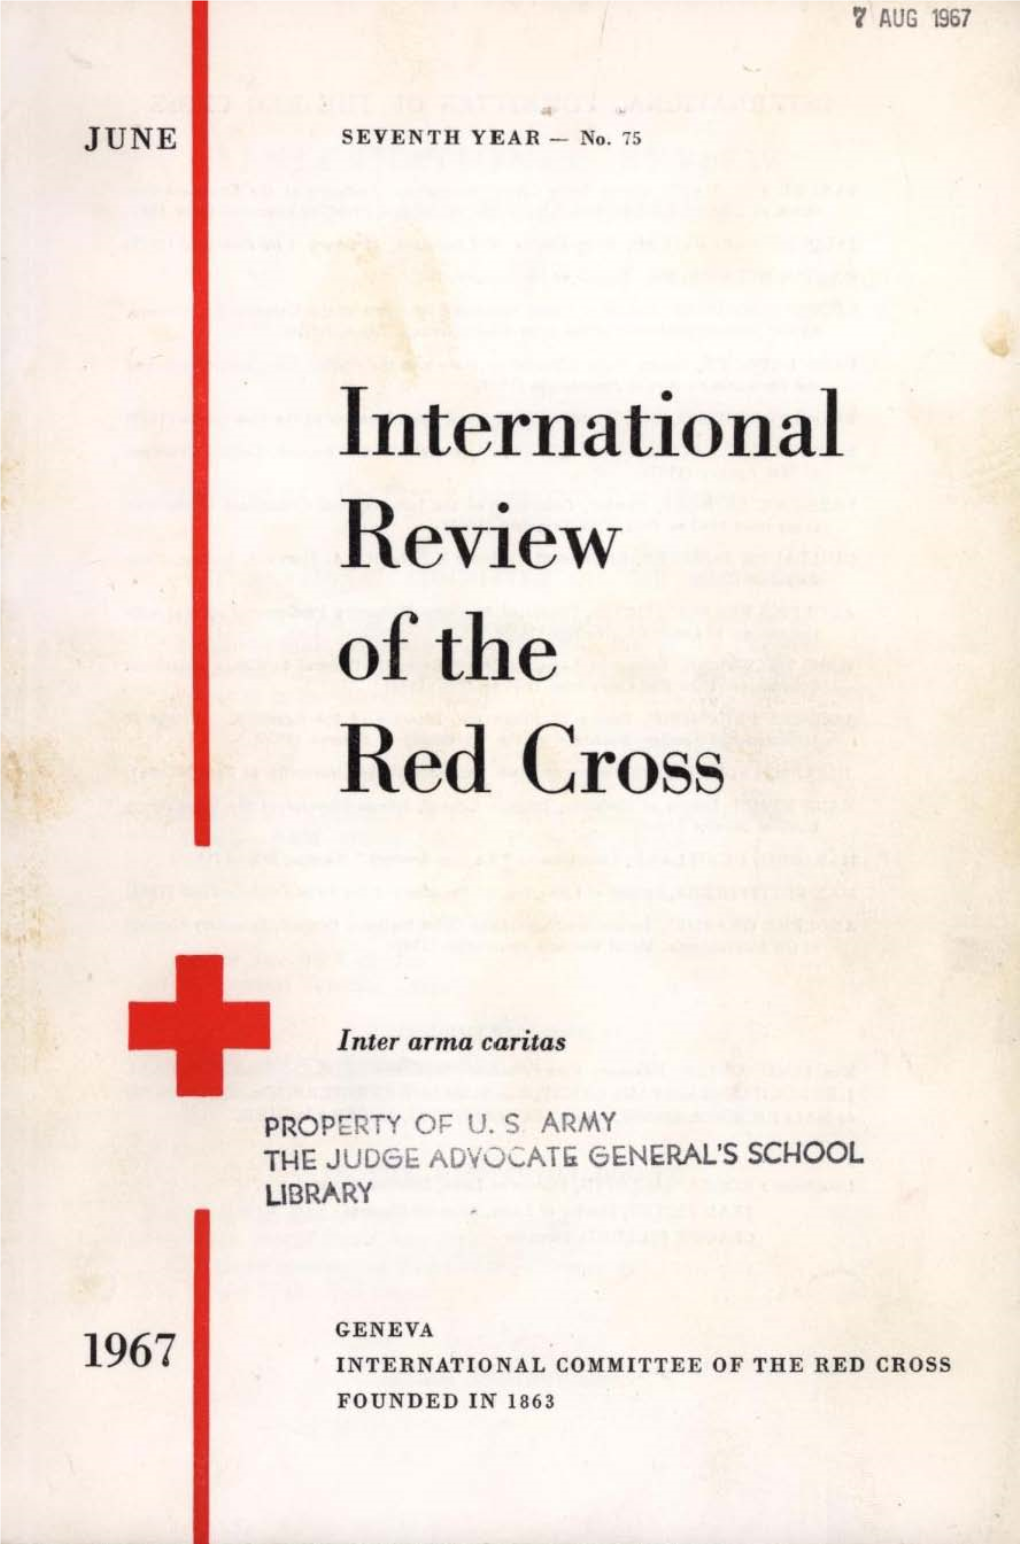 International Review of the Red Cross, June 1967, Seventh Year